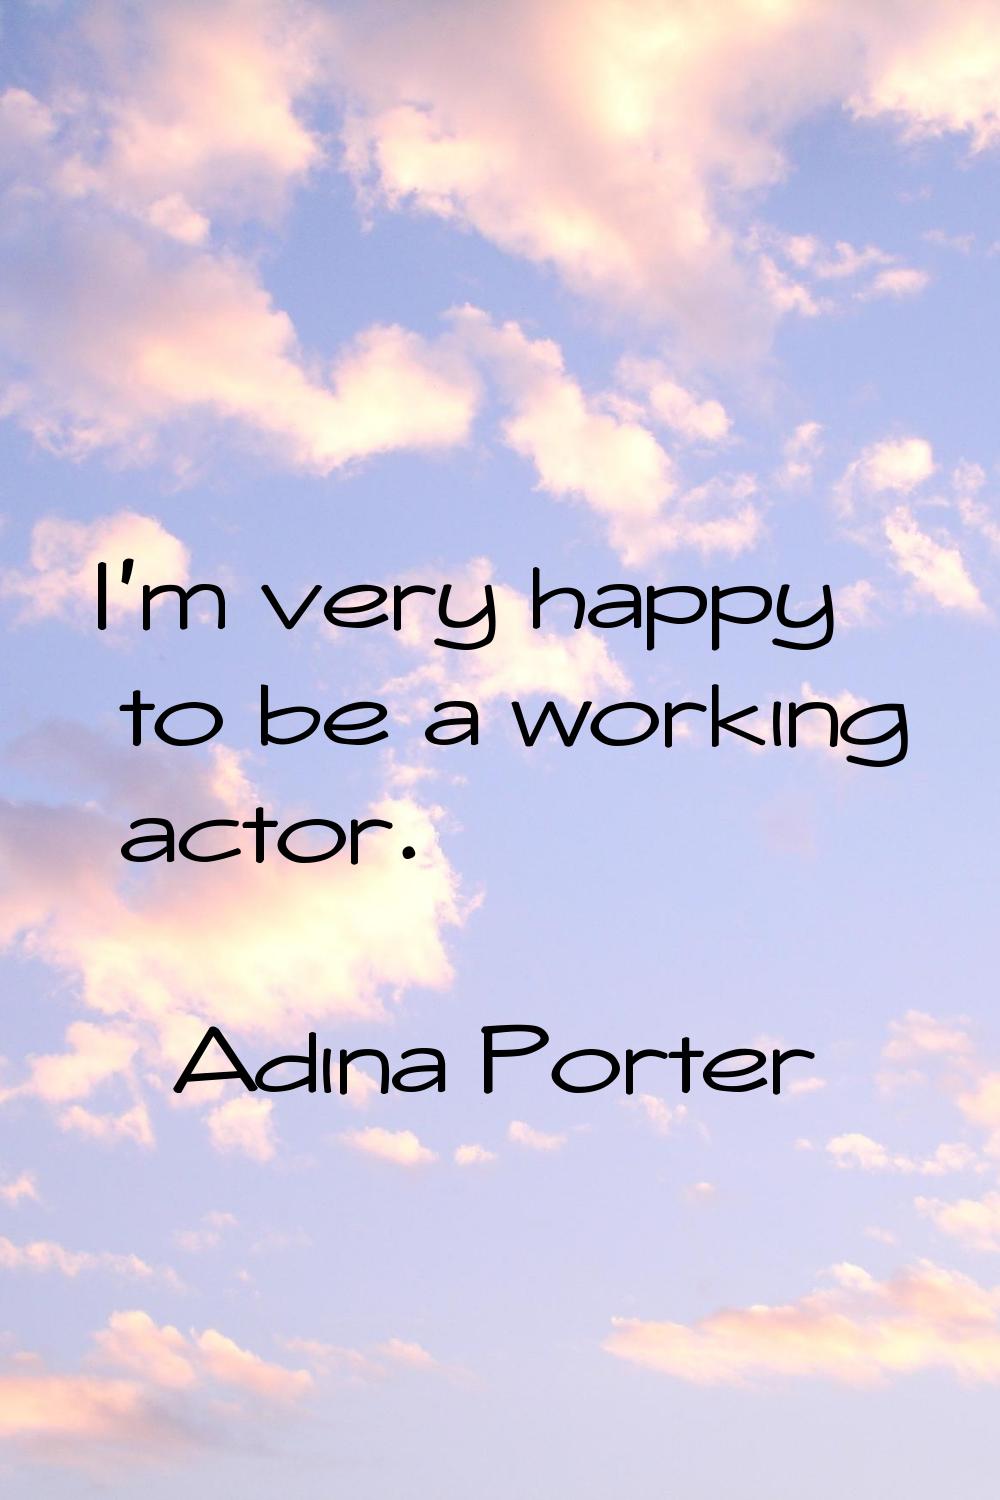 I'm very happy to be a working actor.